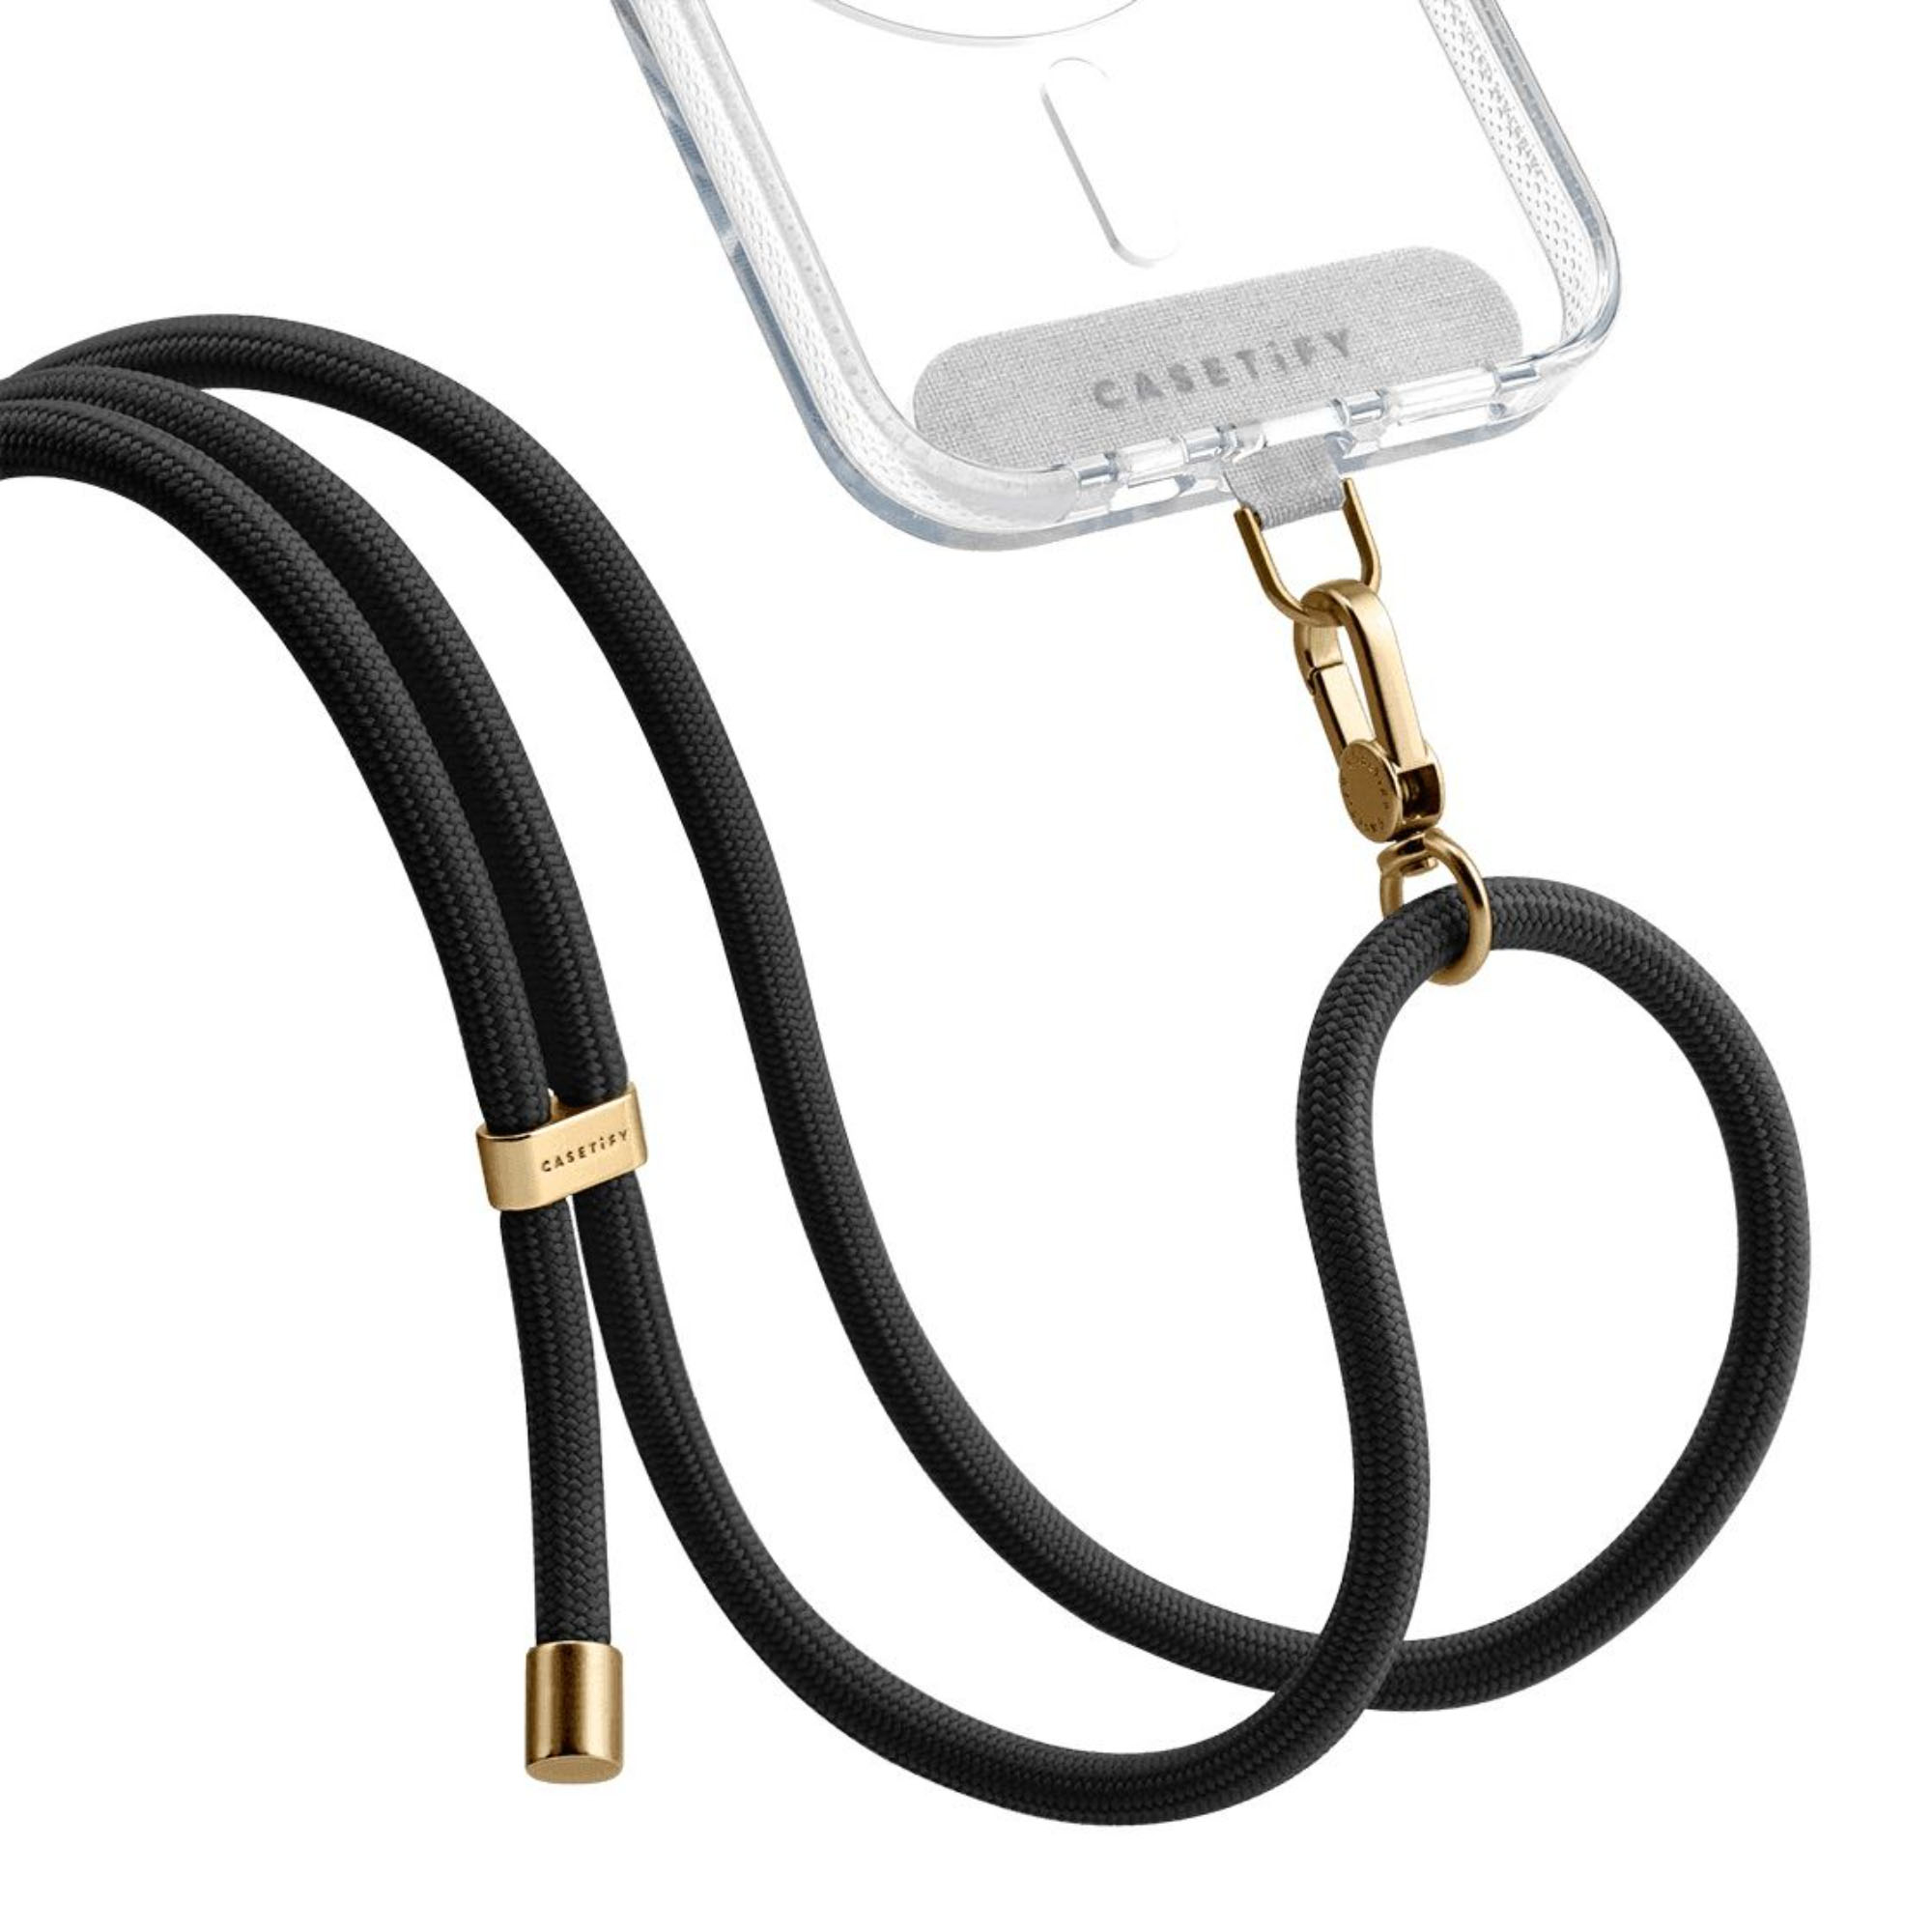 Casetify Rope Phone Strap - Black (Gold)